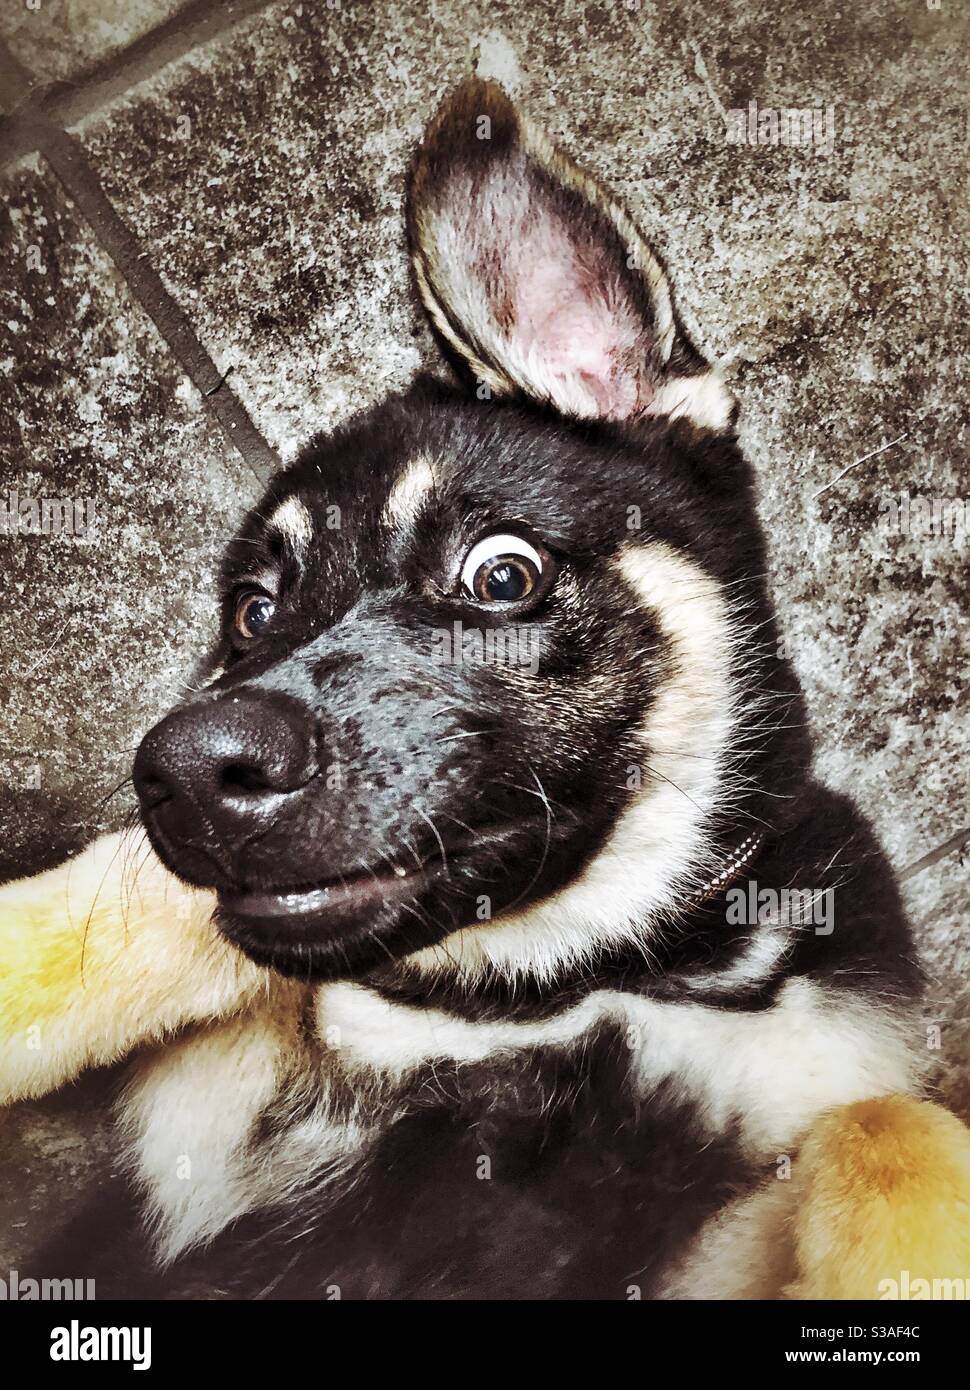 German shepherd puppy face with crazy expression Stock Photo